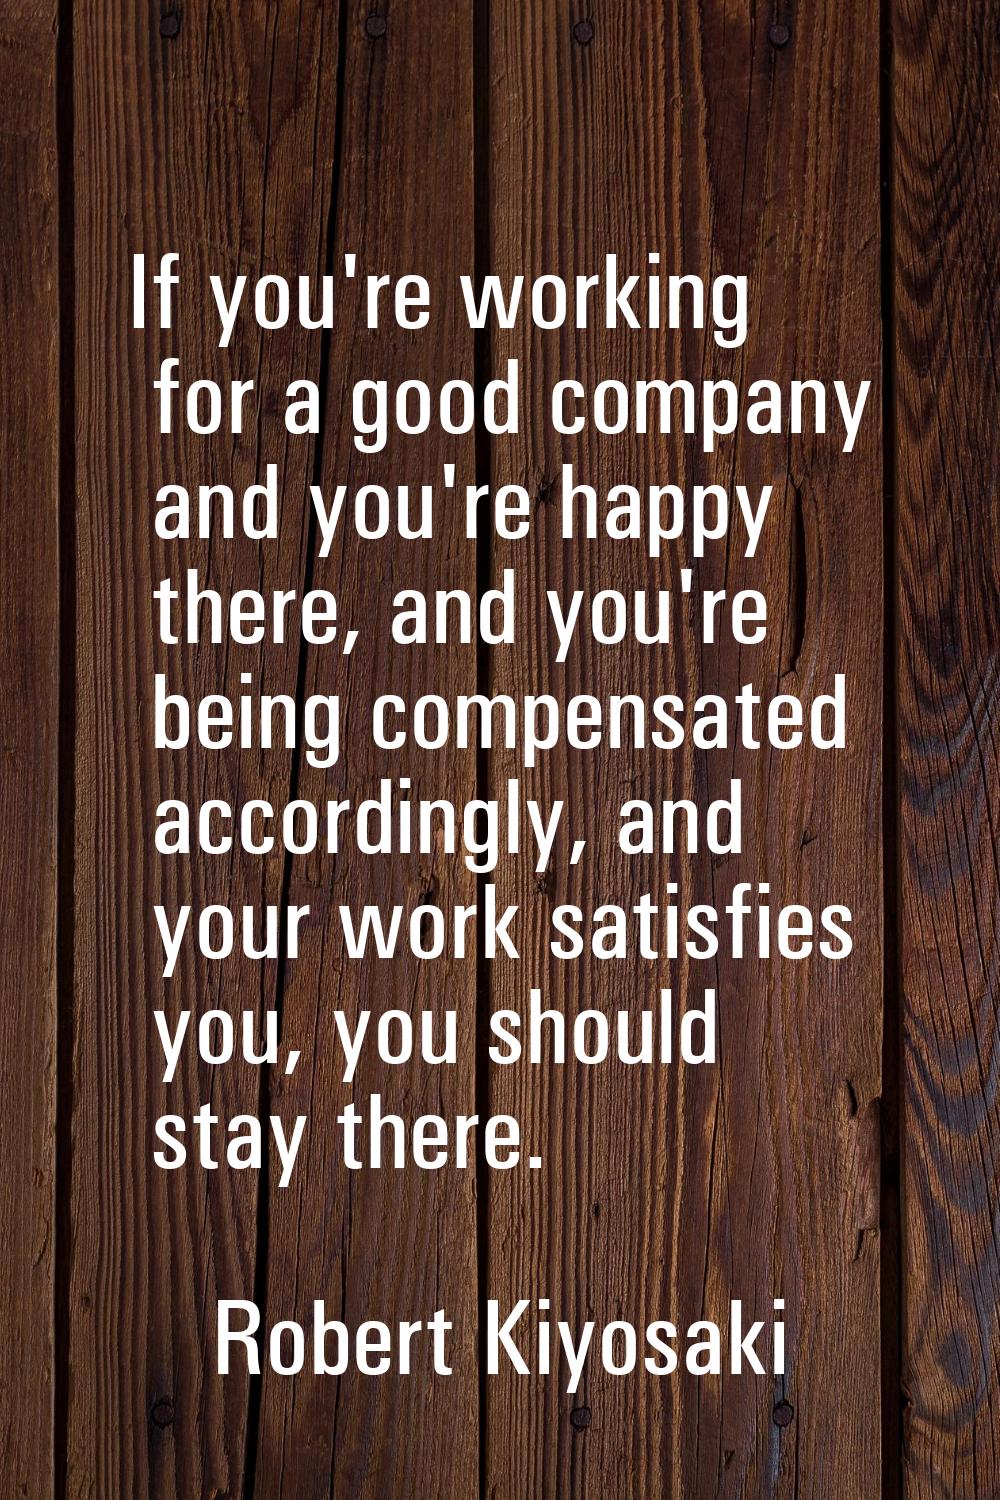 If you're working for a good company and you're happy there, and you're being compensated according